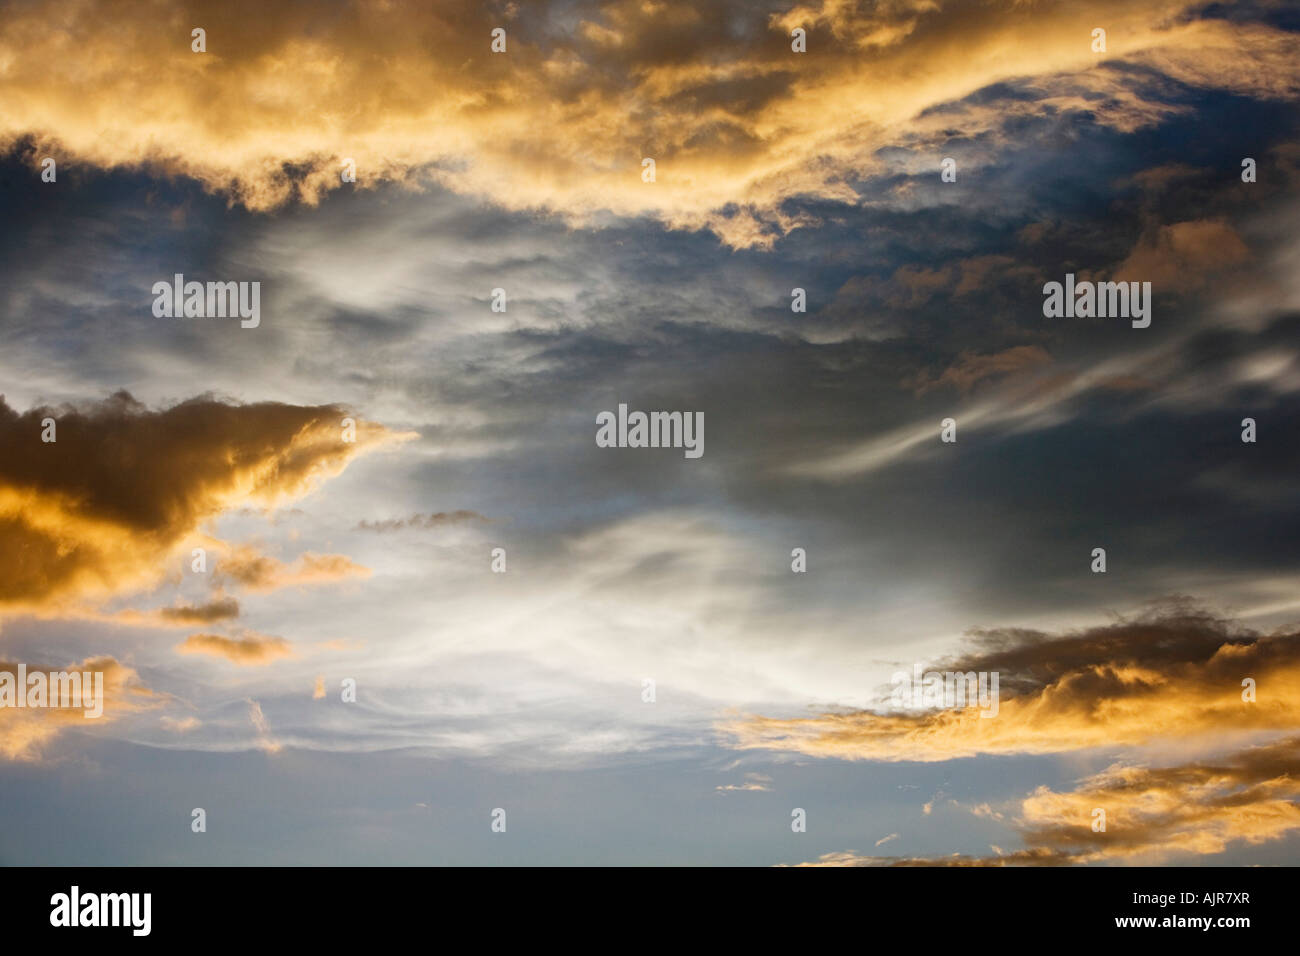 Sunset storm clouds in India. Indian cloudy sky in the evening sunlight Stock Photo